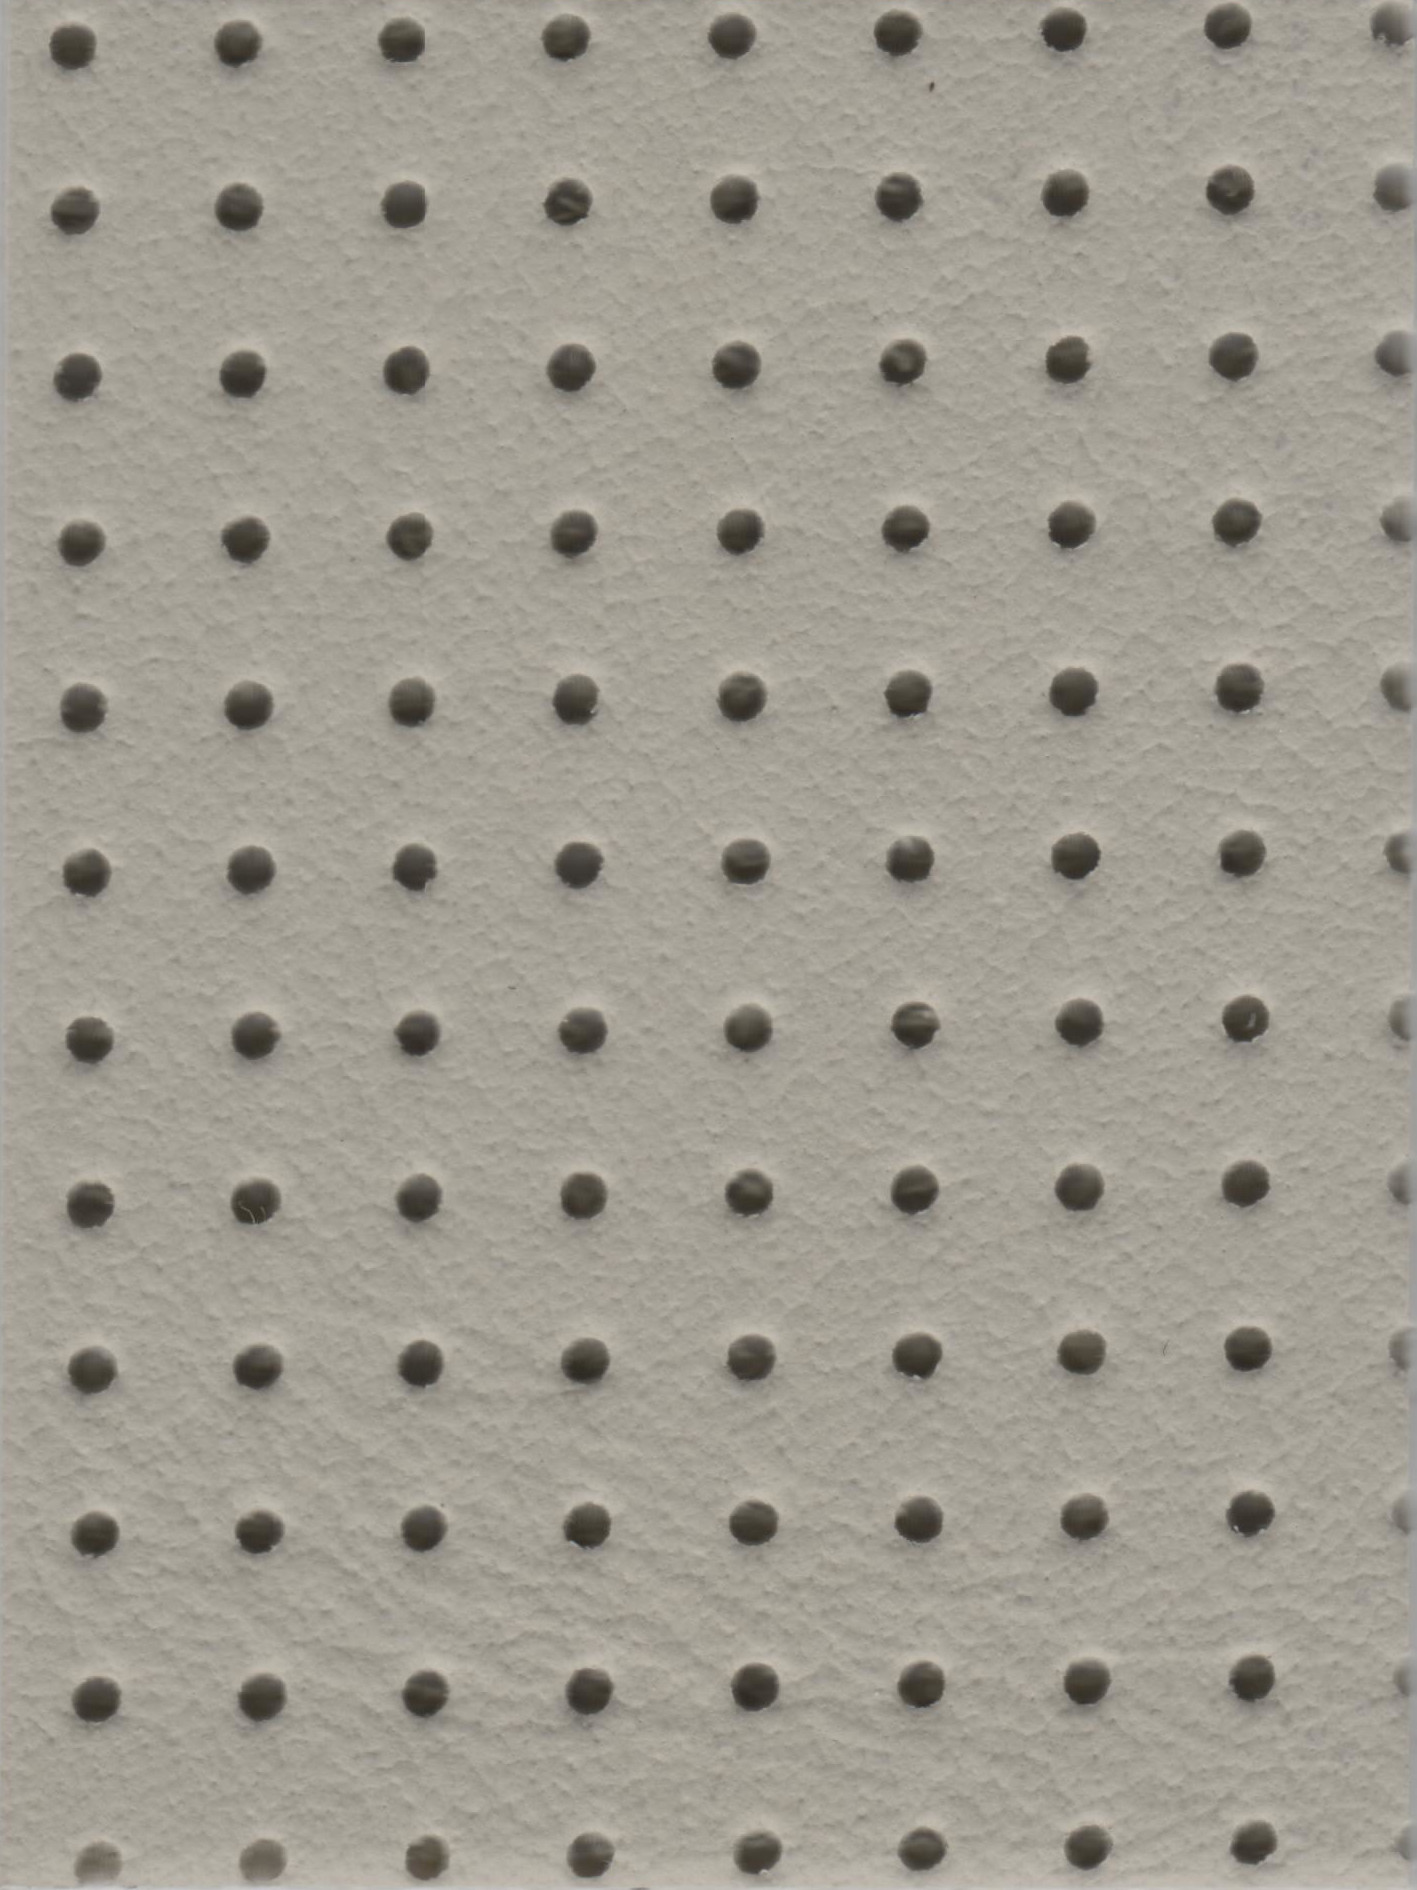 Perforation - Pattern 2 (Mercedes, Opel, Ford)